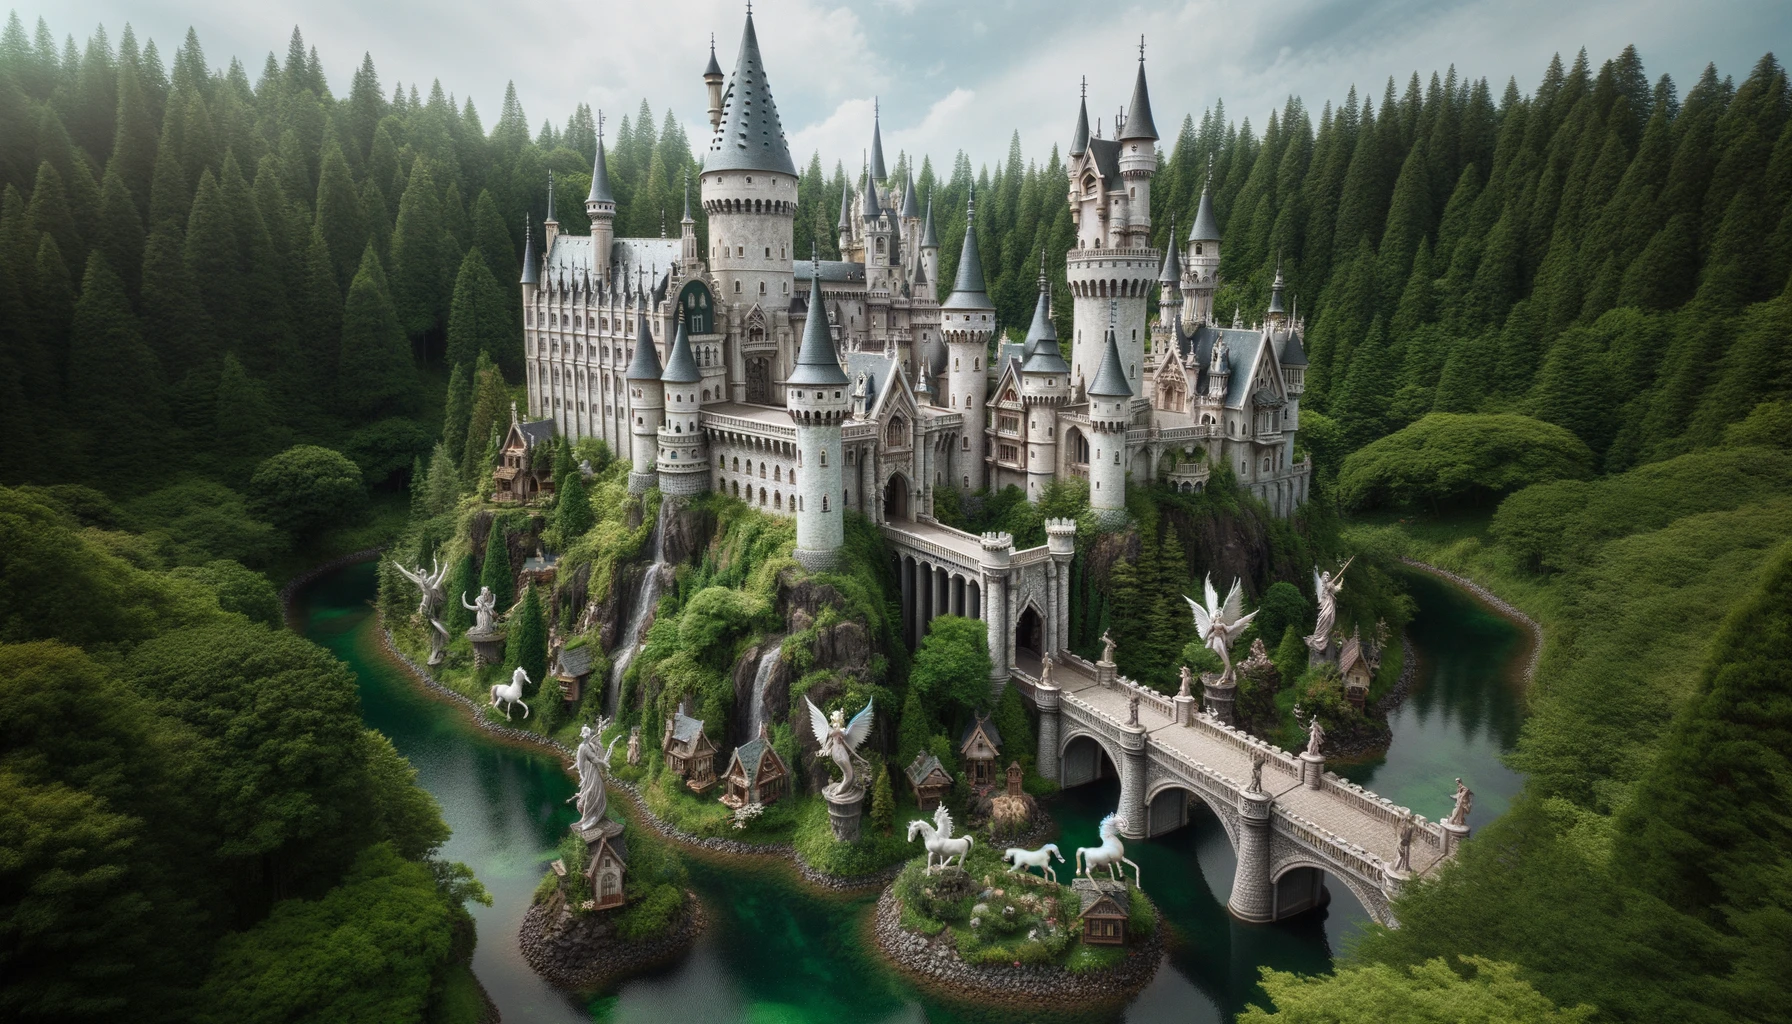 Photo of a grand medieval castle, its towers and turrets reaching for the sky. The castle is perched on a hill, overlooking the land below. Encircling it is a dense forest, where the trees seem to have a life of their own. Amongst the greenery, magical creatures like unicorns with shimmering manes and fairies with delicate wings can be seen. A deep moat, filled with clear water, protects the castle. A sturdy stone bridge, adorned with statues, provides passage to the castle's ornate gates.